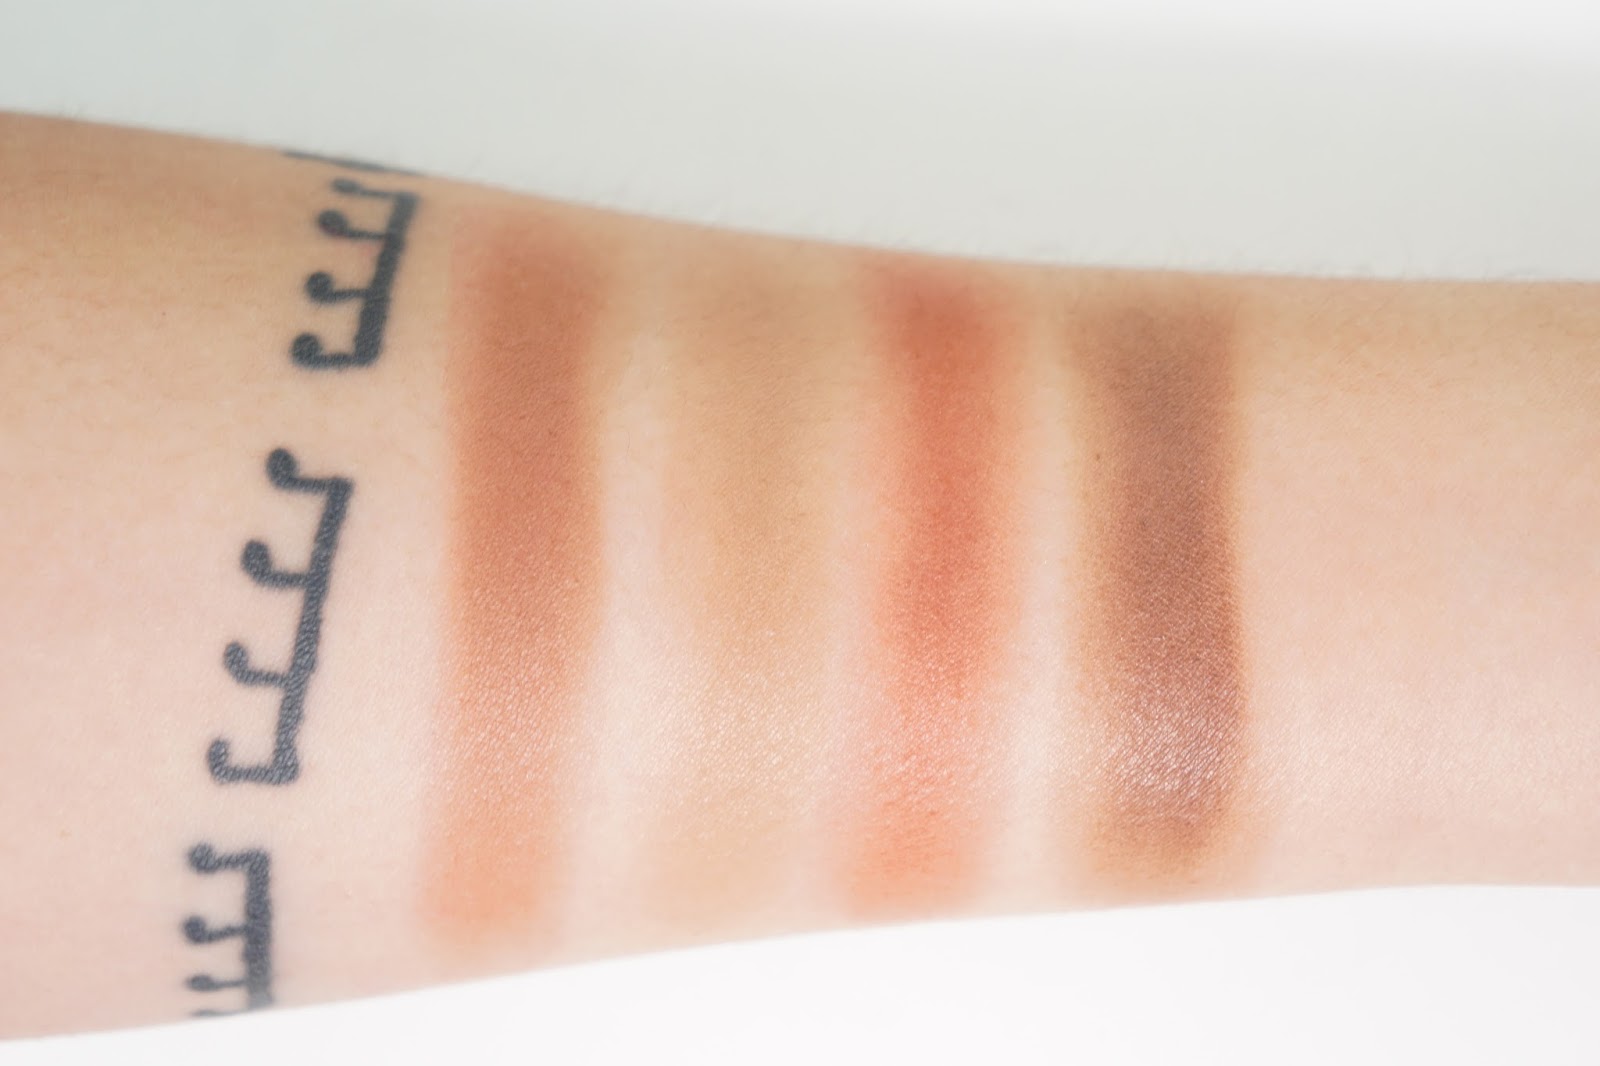 Review & Swatches: Chanel Les 4 Ombres in 268 Candeur et